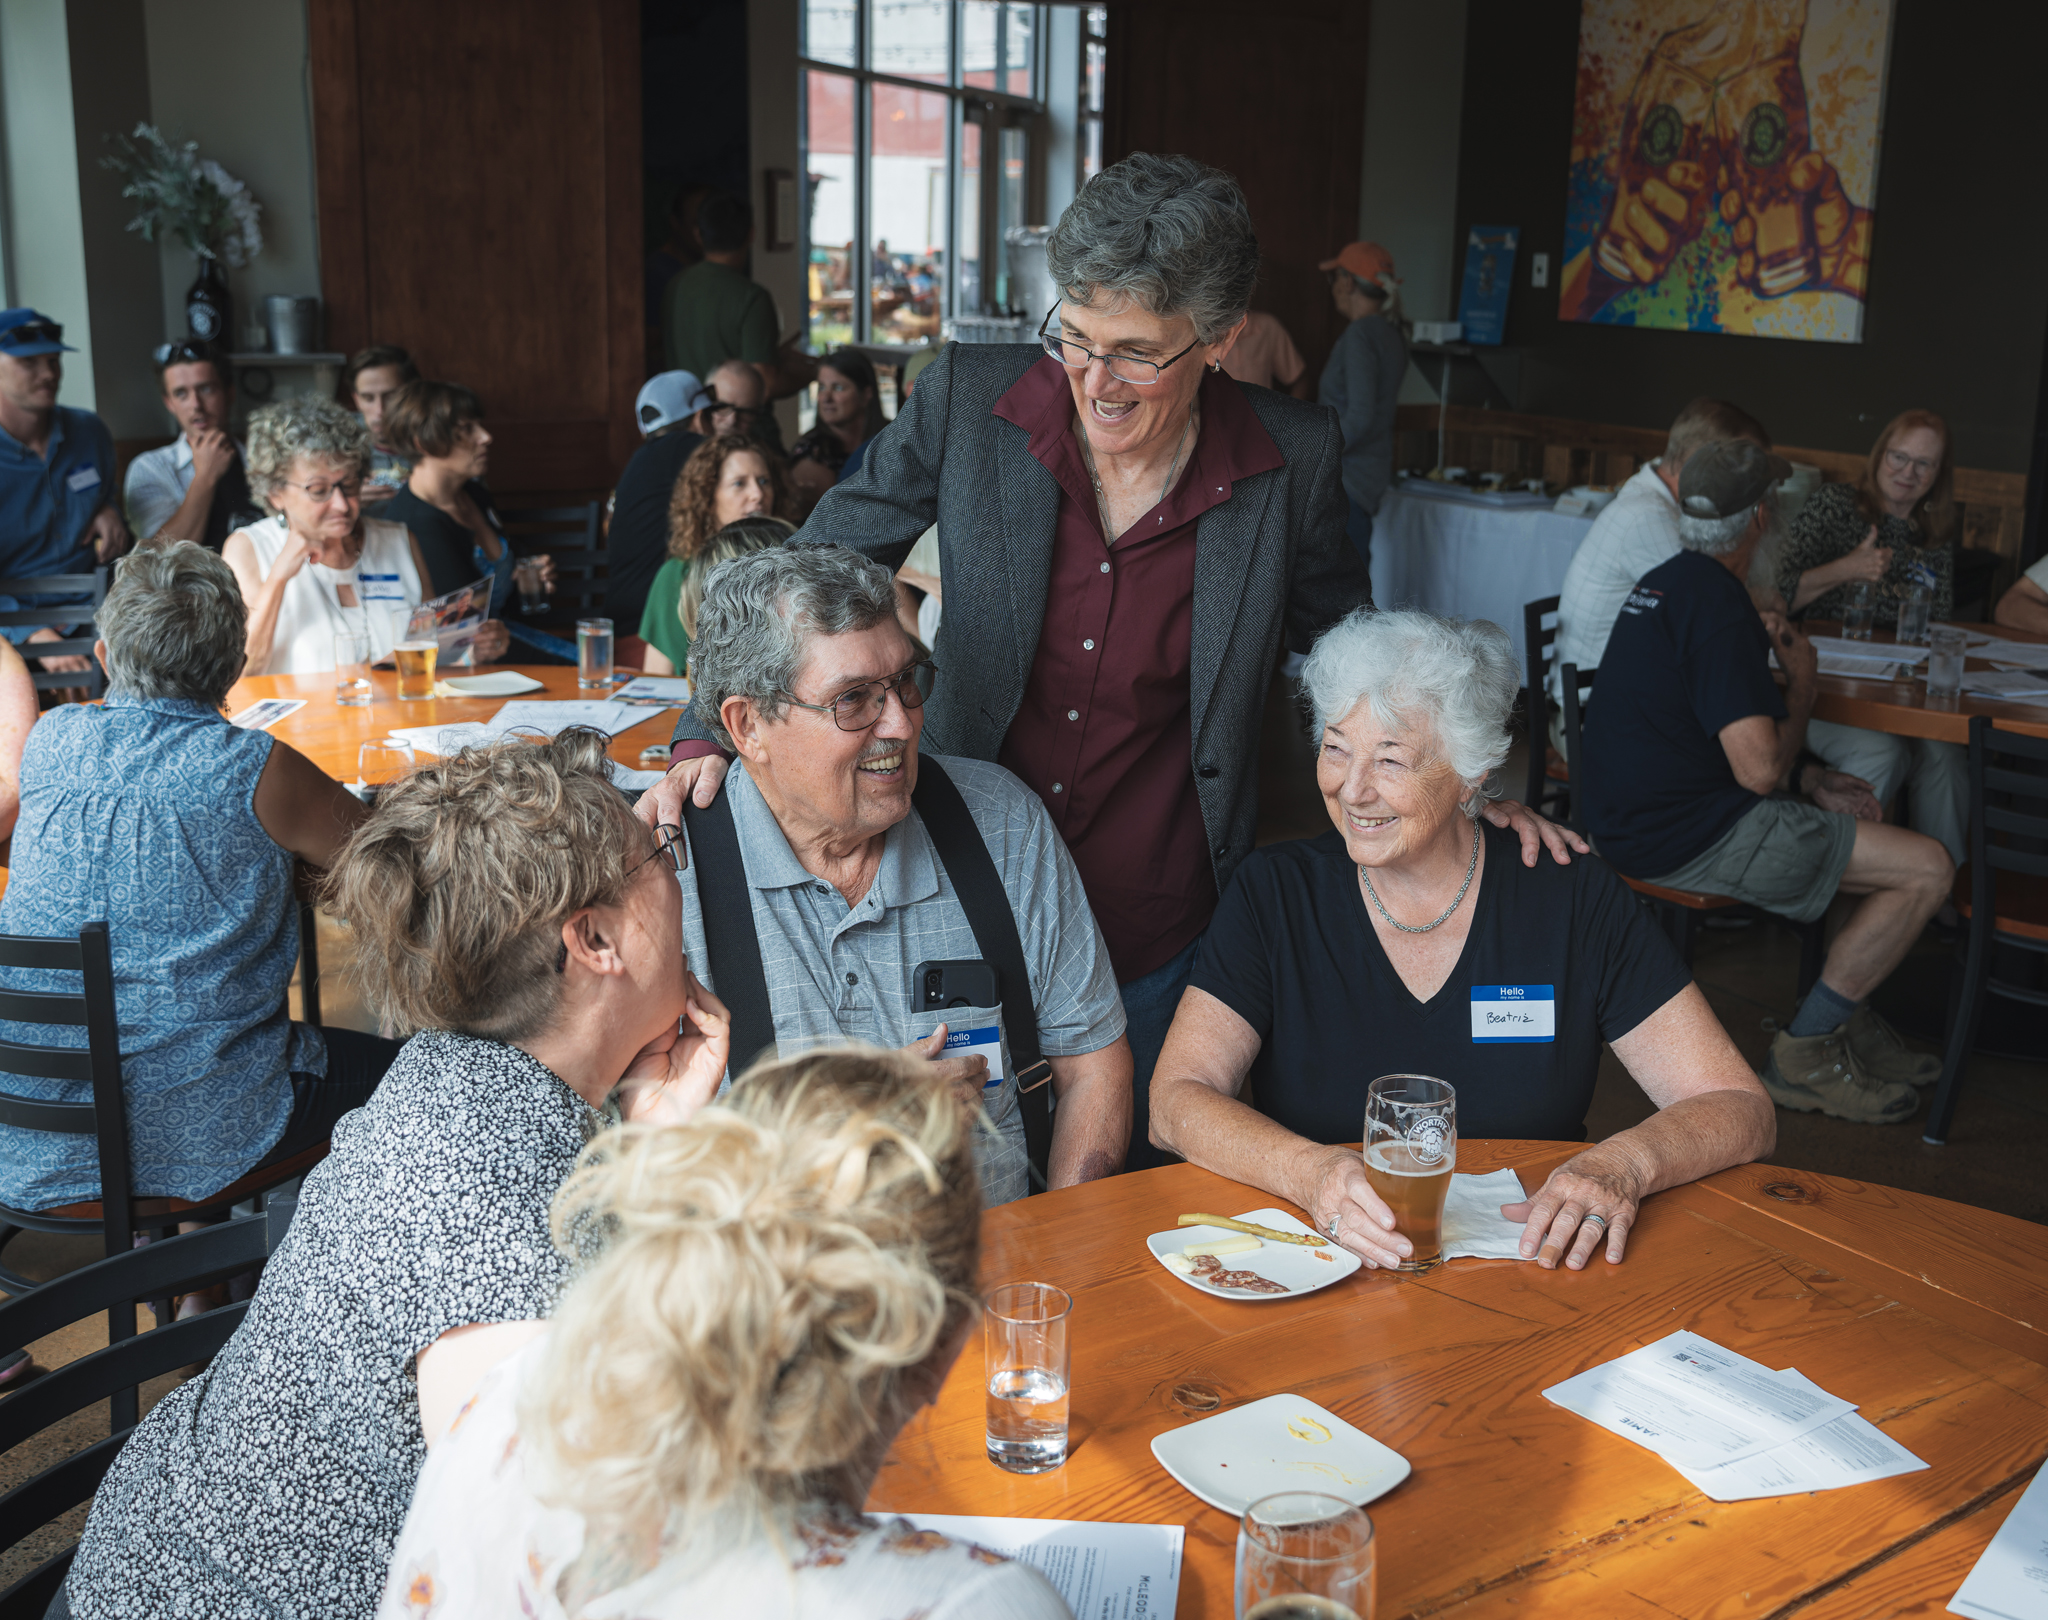 Jamie McLeod-Skinner chats with seated supporters at an event in Bend, OR in 2023.